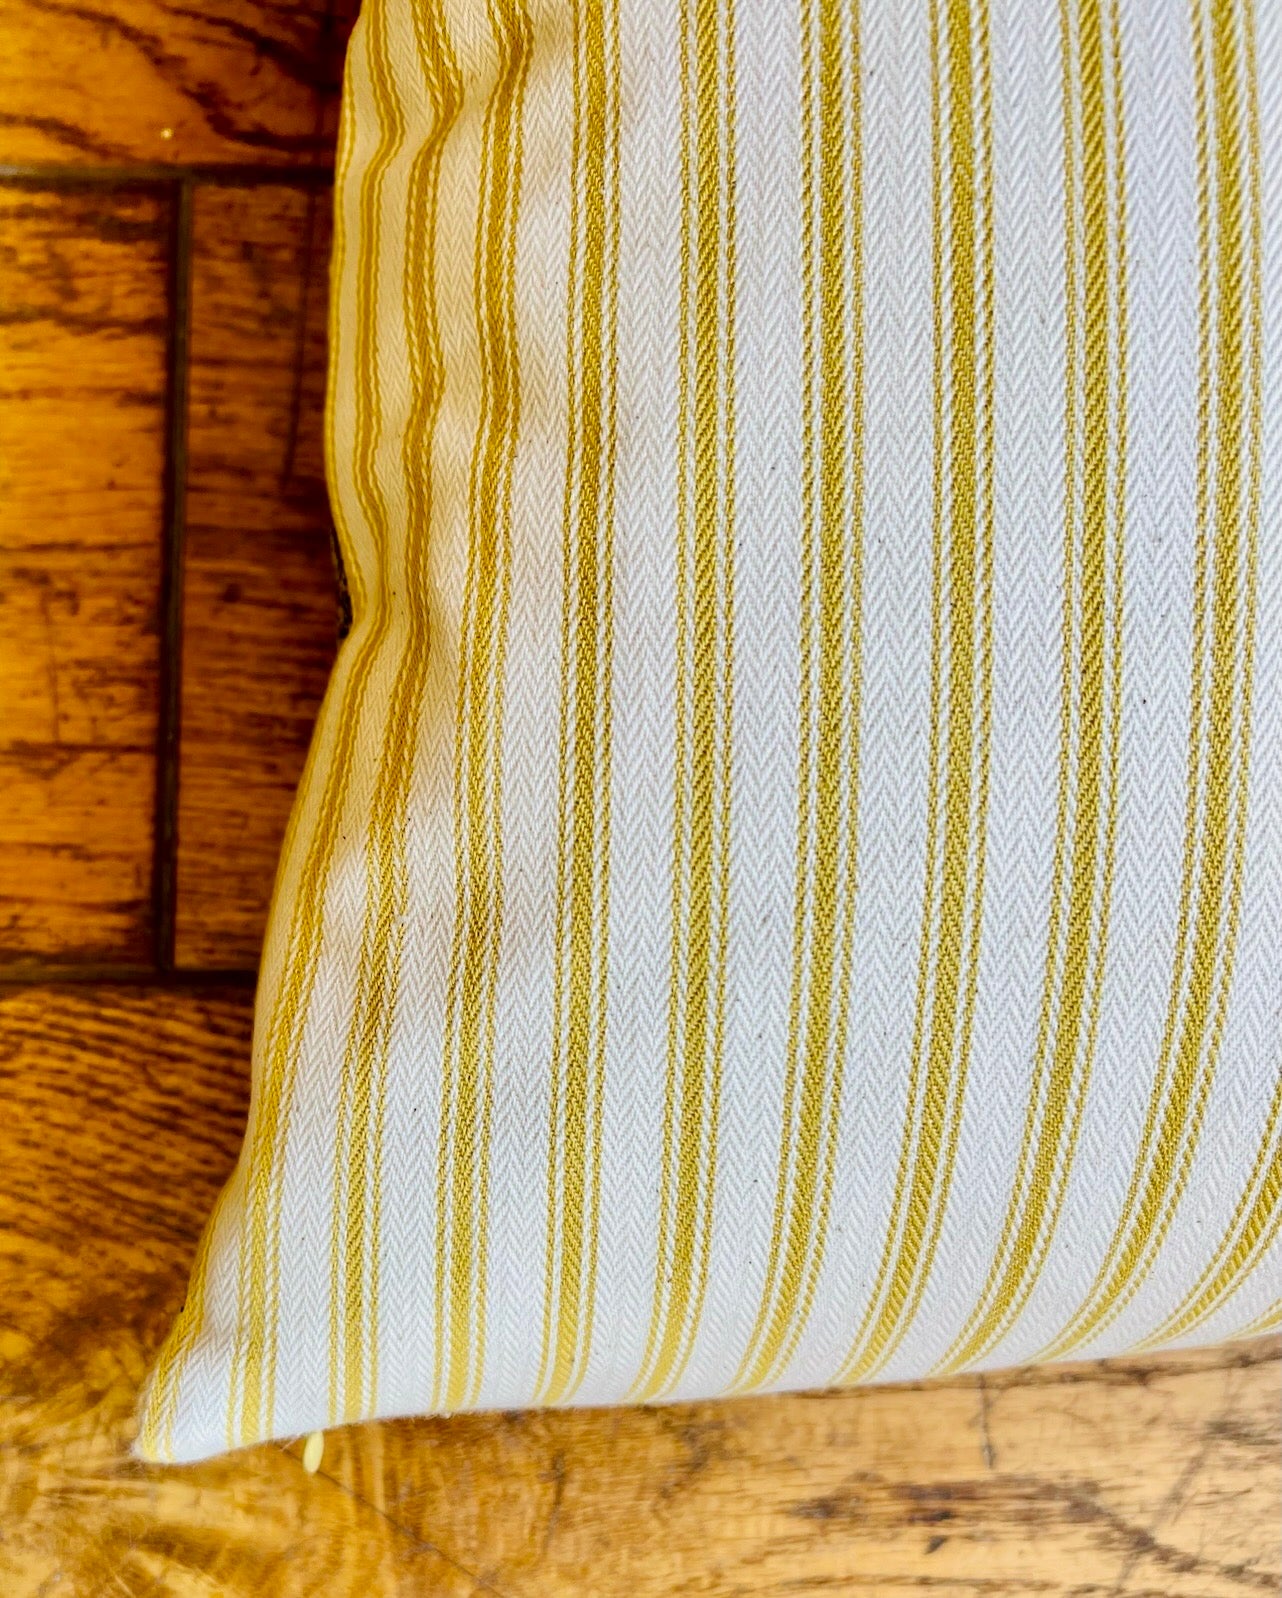 Cushion - Vintage Linen - Partridge in a Pear Tree - Yellow Ticking Stripe reverse - Size Small | New Romantic